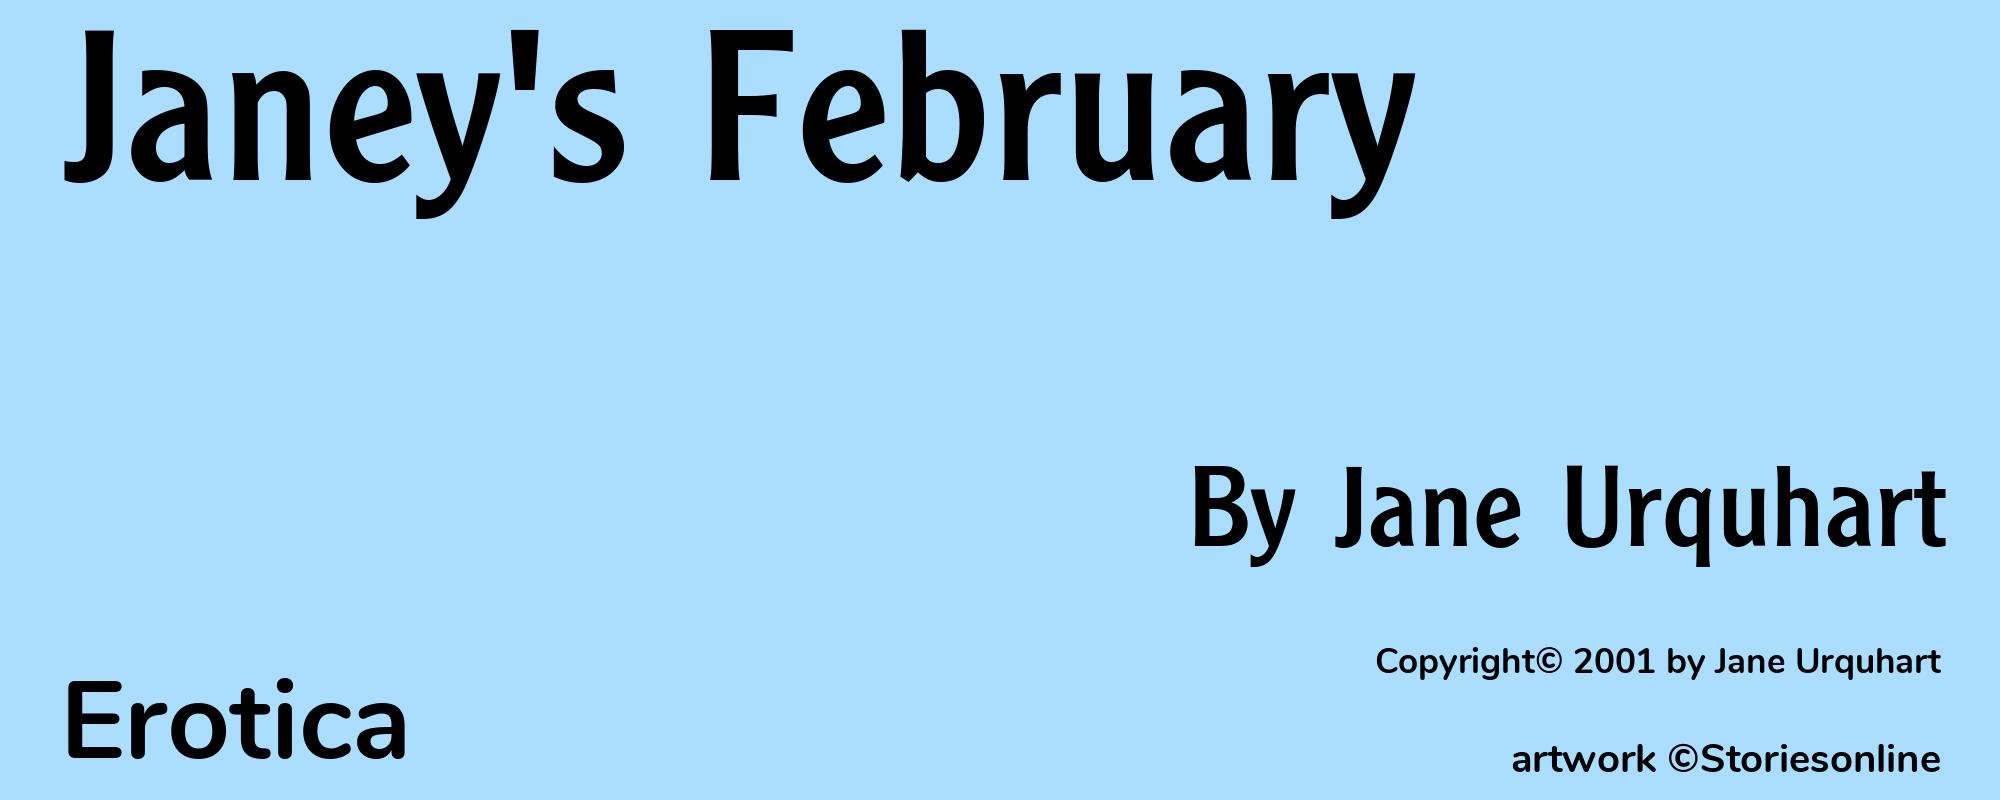 Janey's February - Cover